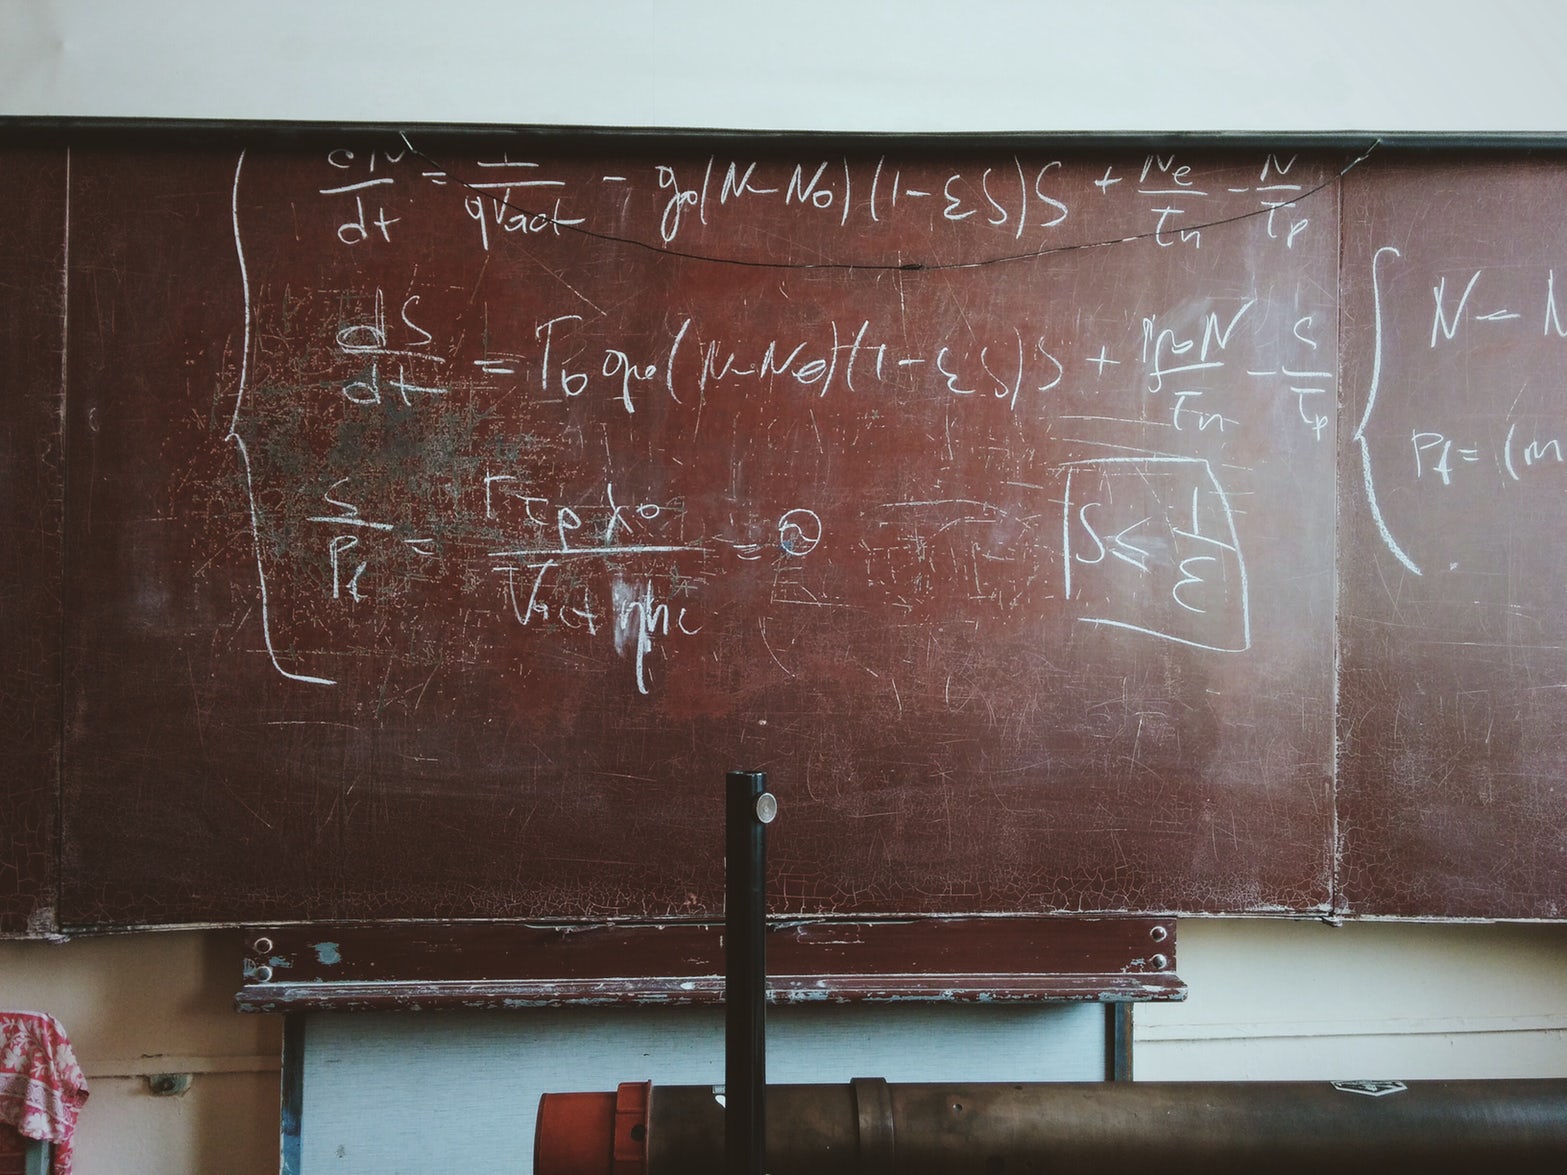 Old chalkboard displays a series of mathematical equations